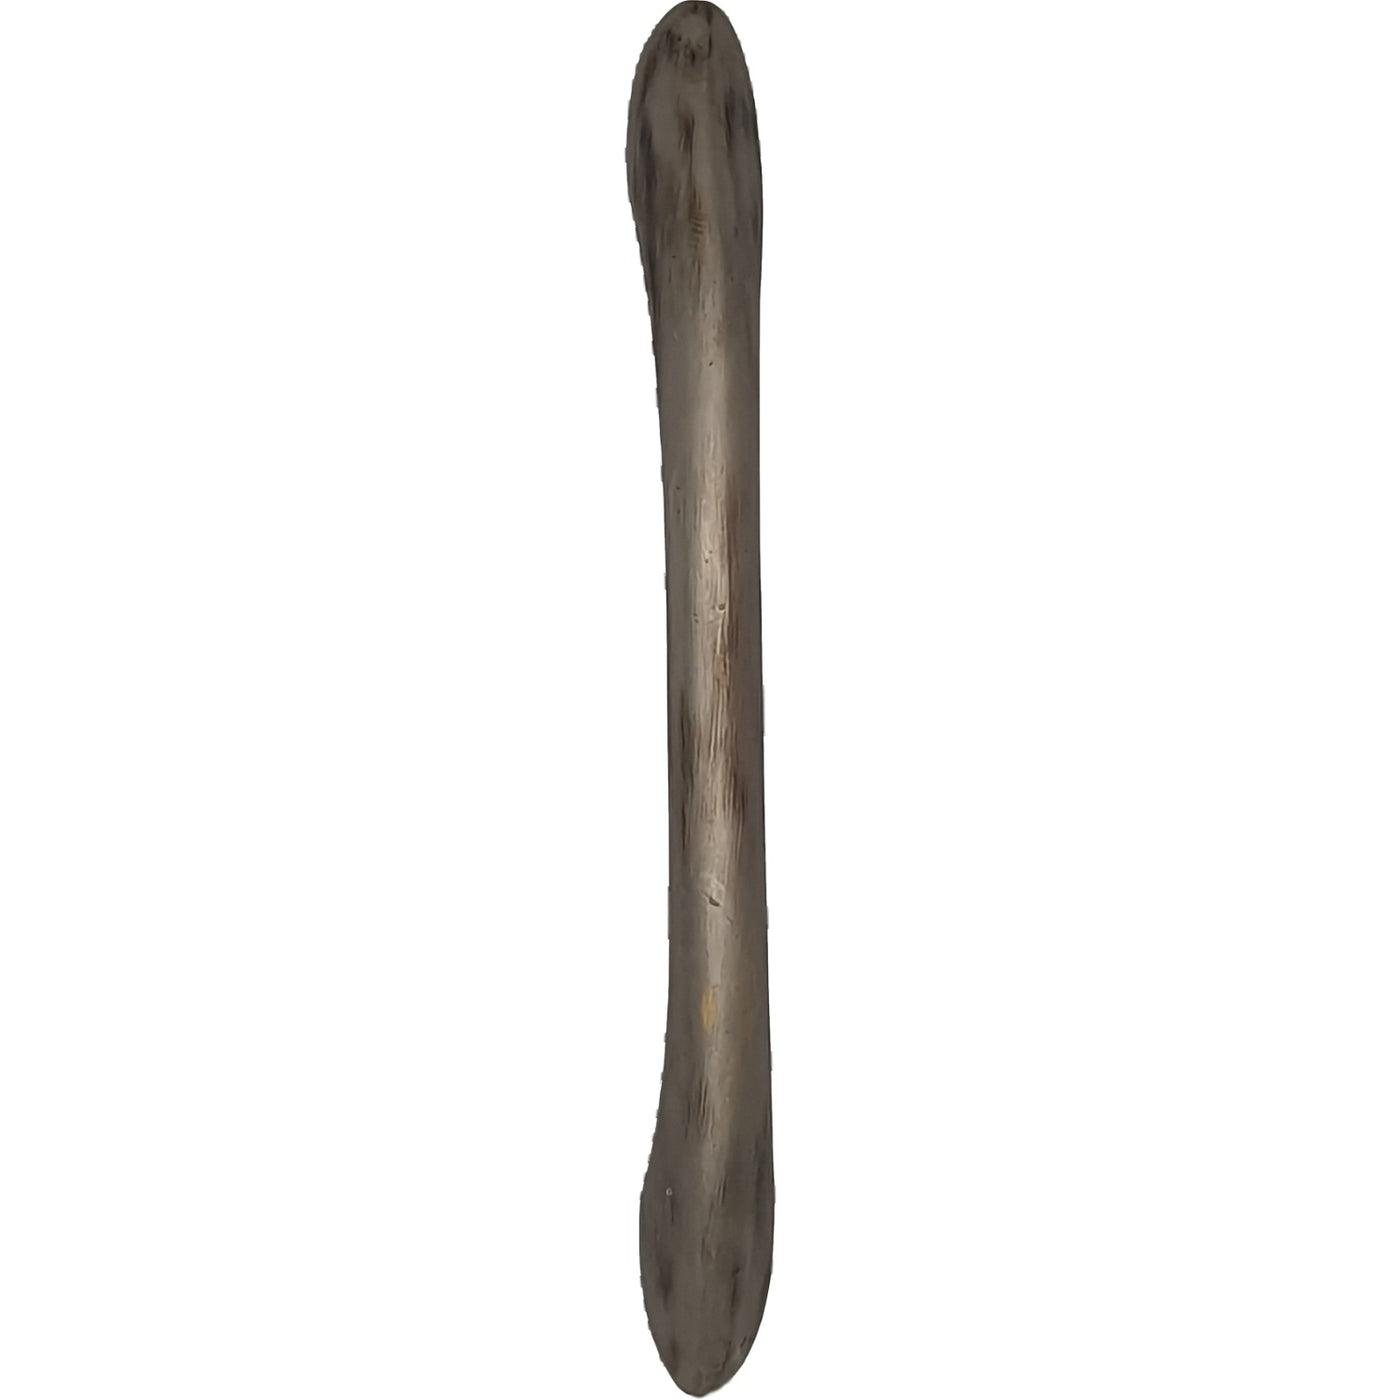 5 Inch Overall (4 Inch c-c) Traditional Solid Brass Pull